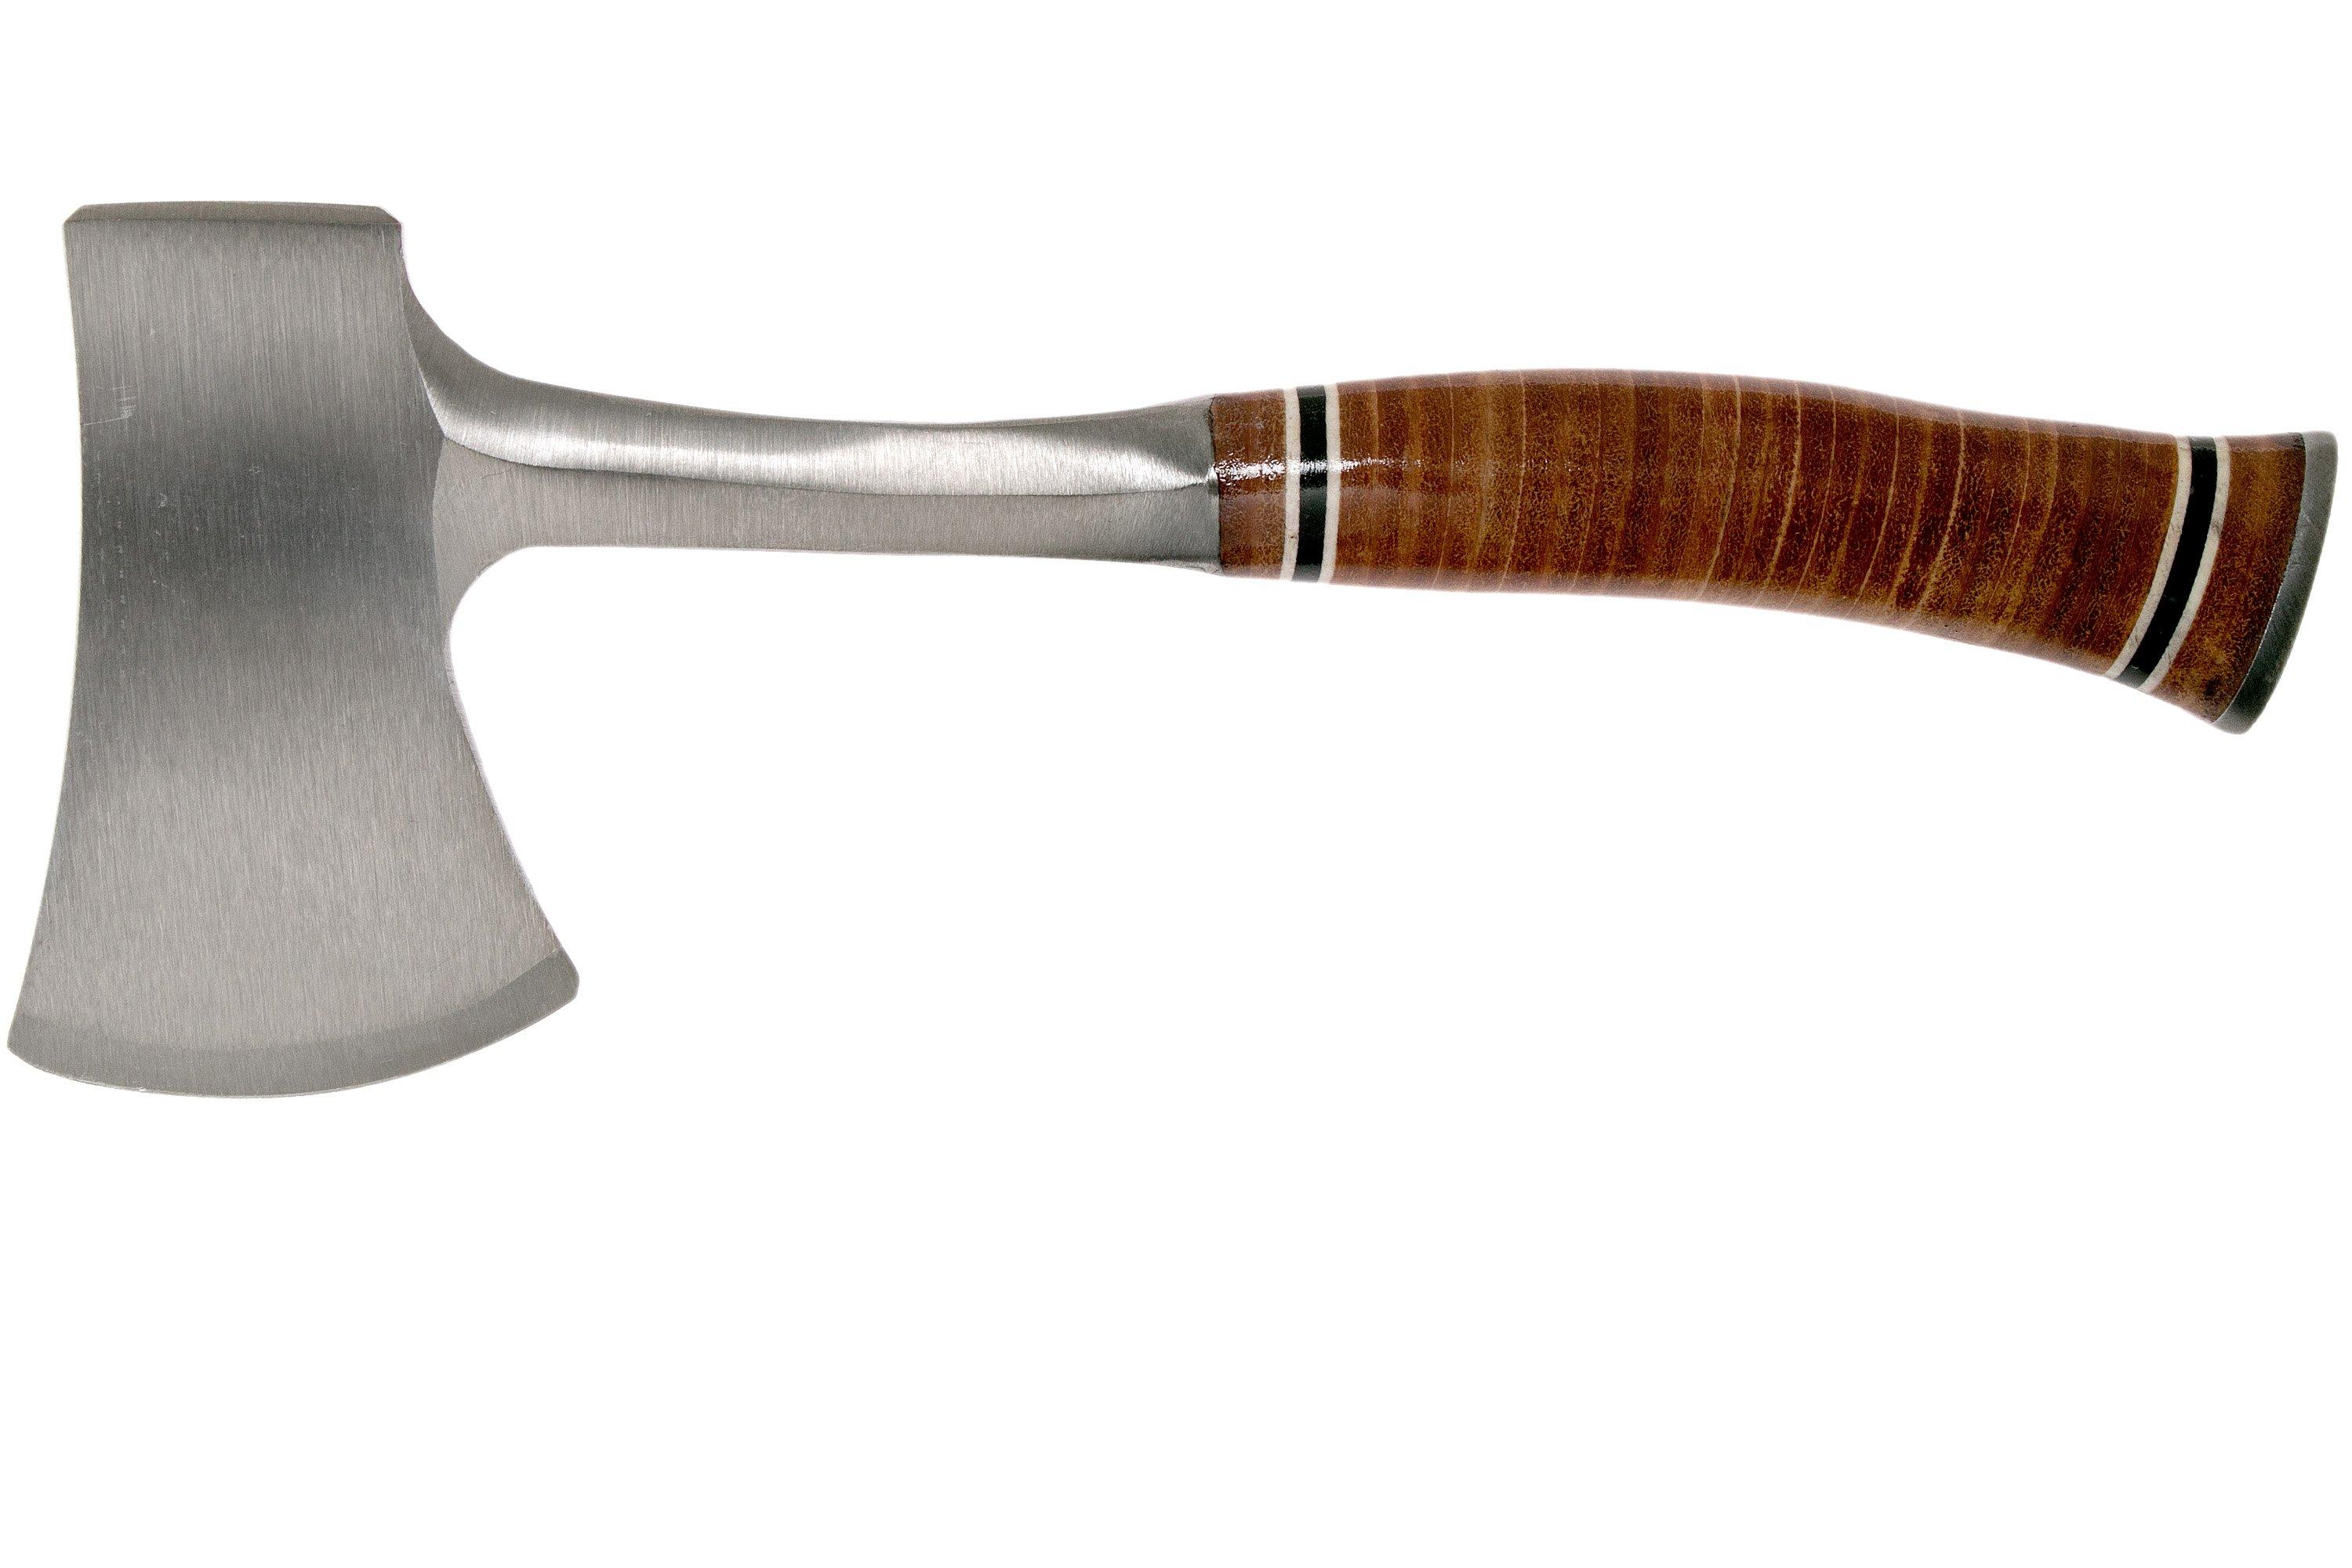 Estwing E24A 14-Inch Sportsman's Axe with Leather Grip & Nylon Sheath 